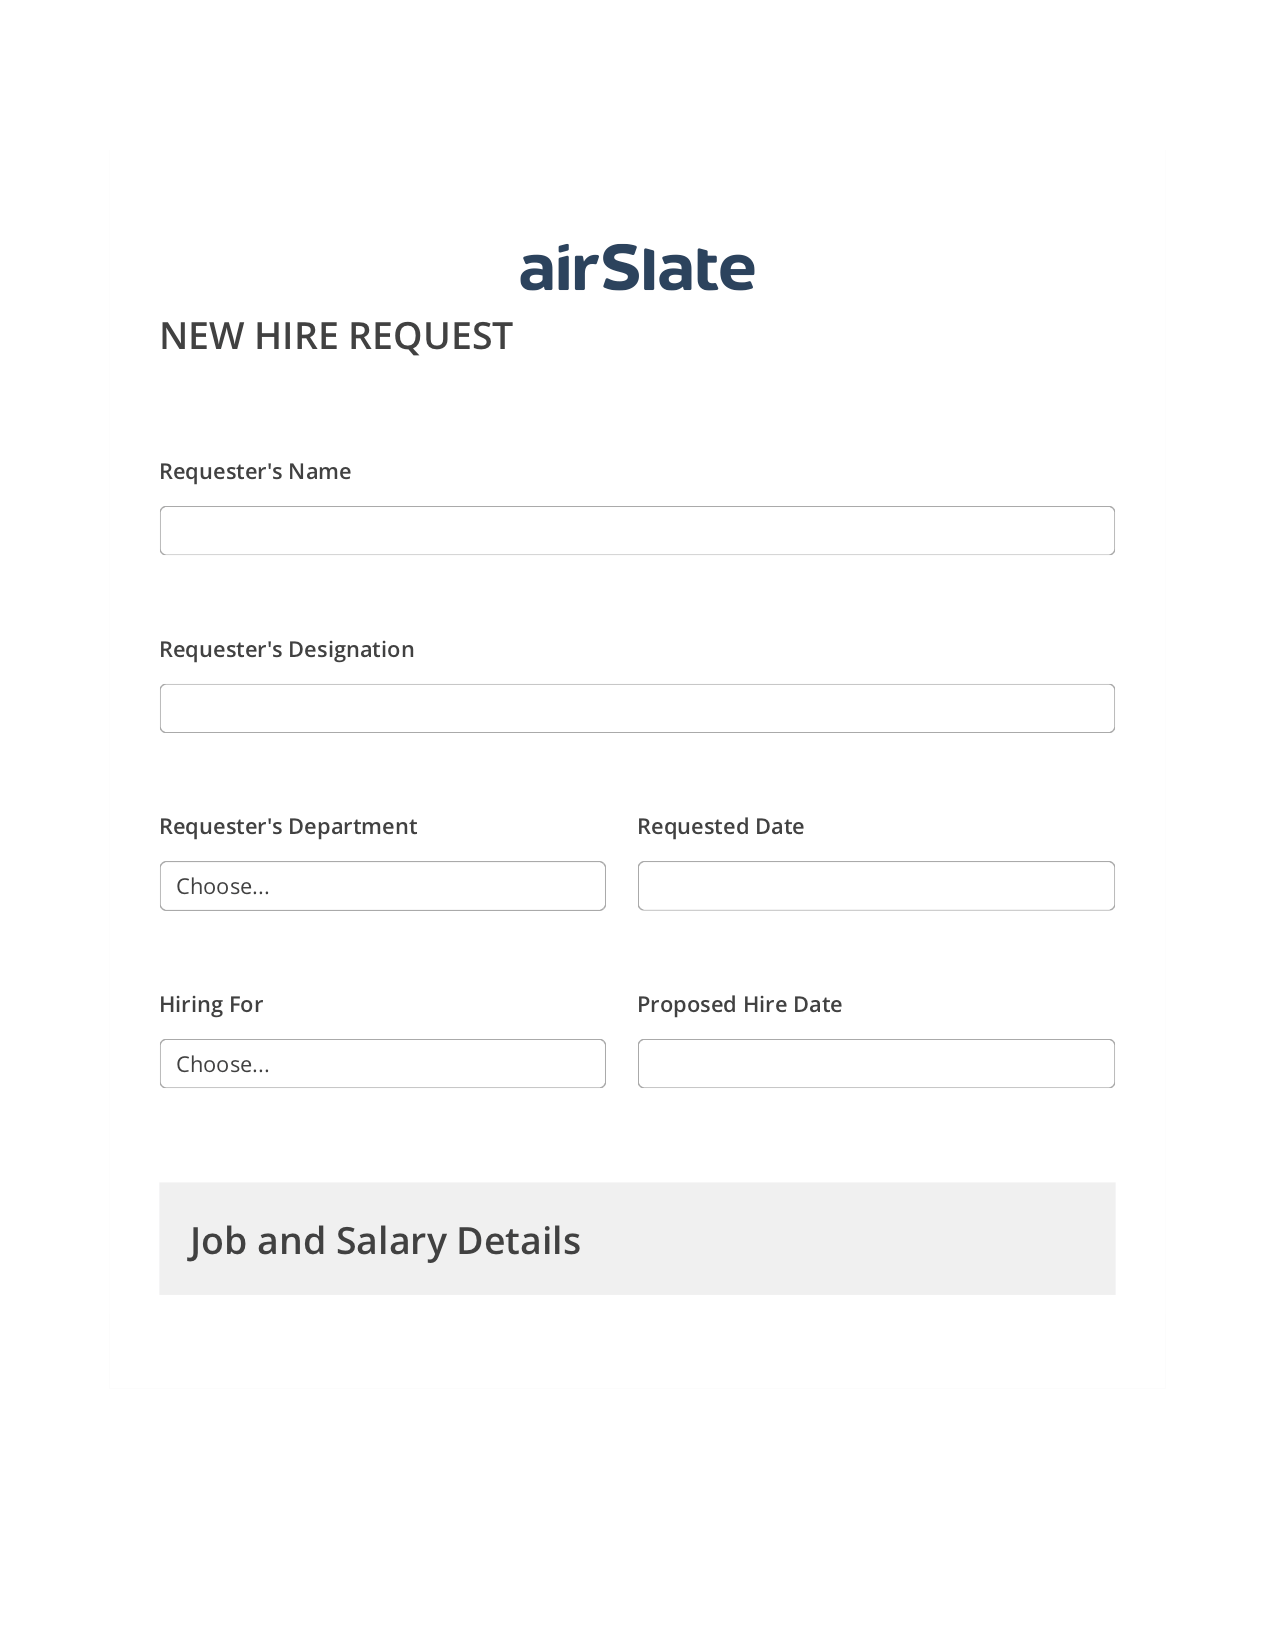 Hiring Request Workflow Pre-fill from Google Sheets Bot, Update MS Dynamics 365 Record Bot, Export to NetSuite Bot